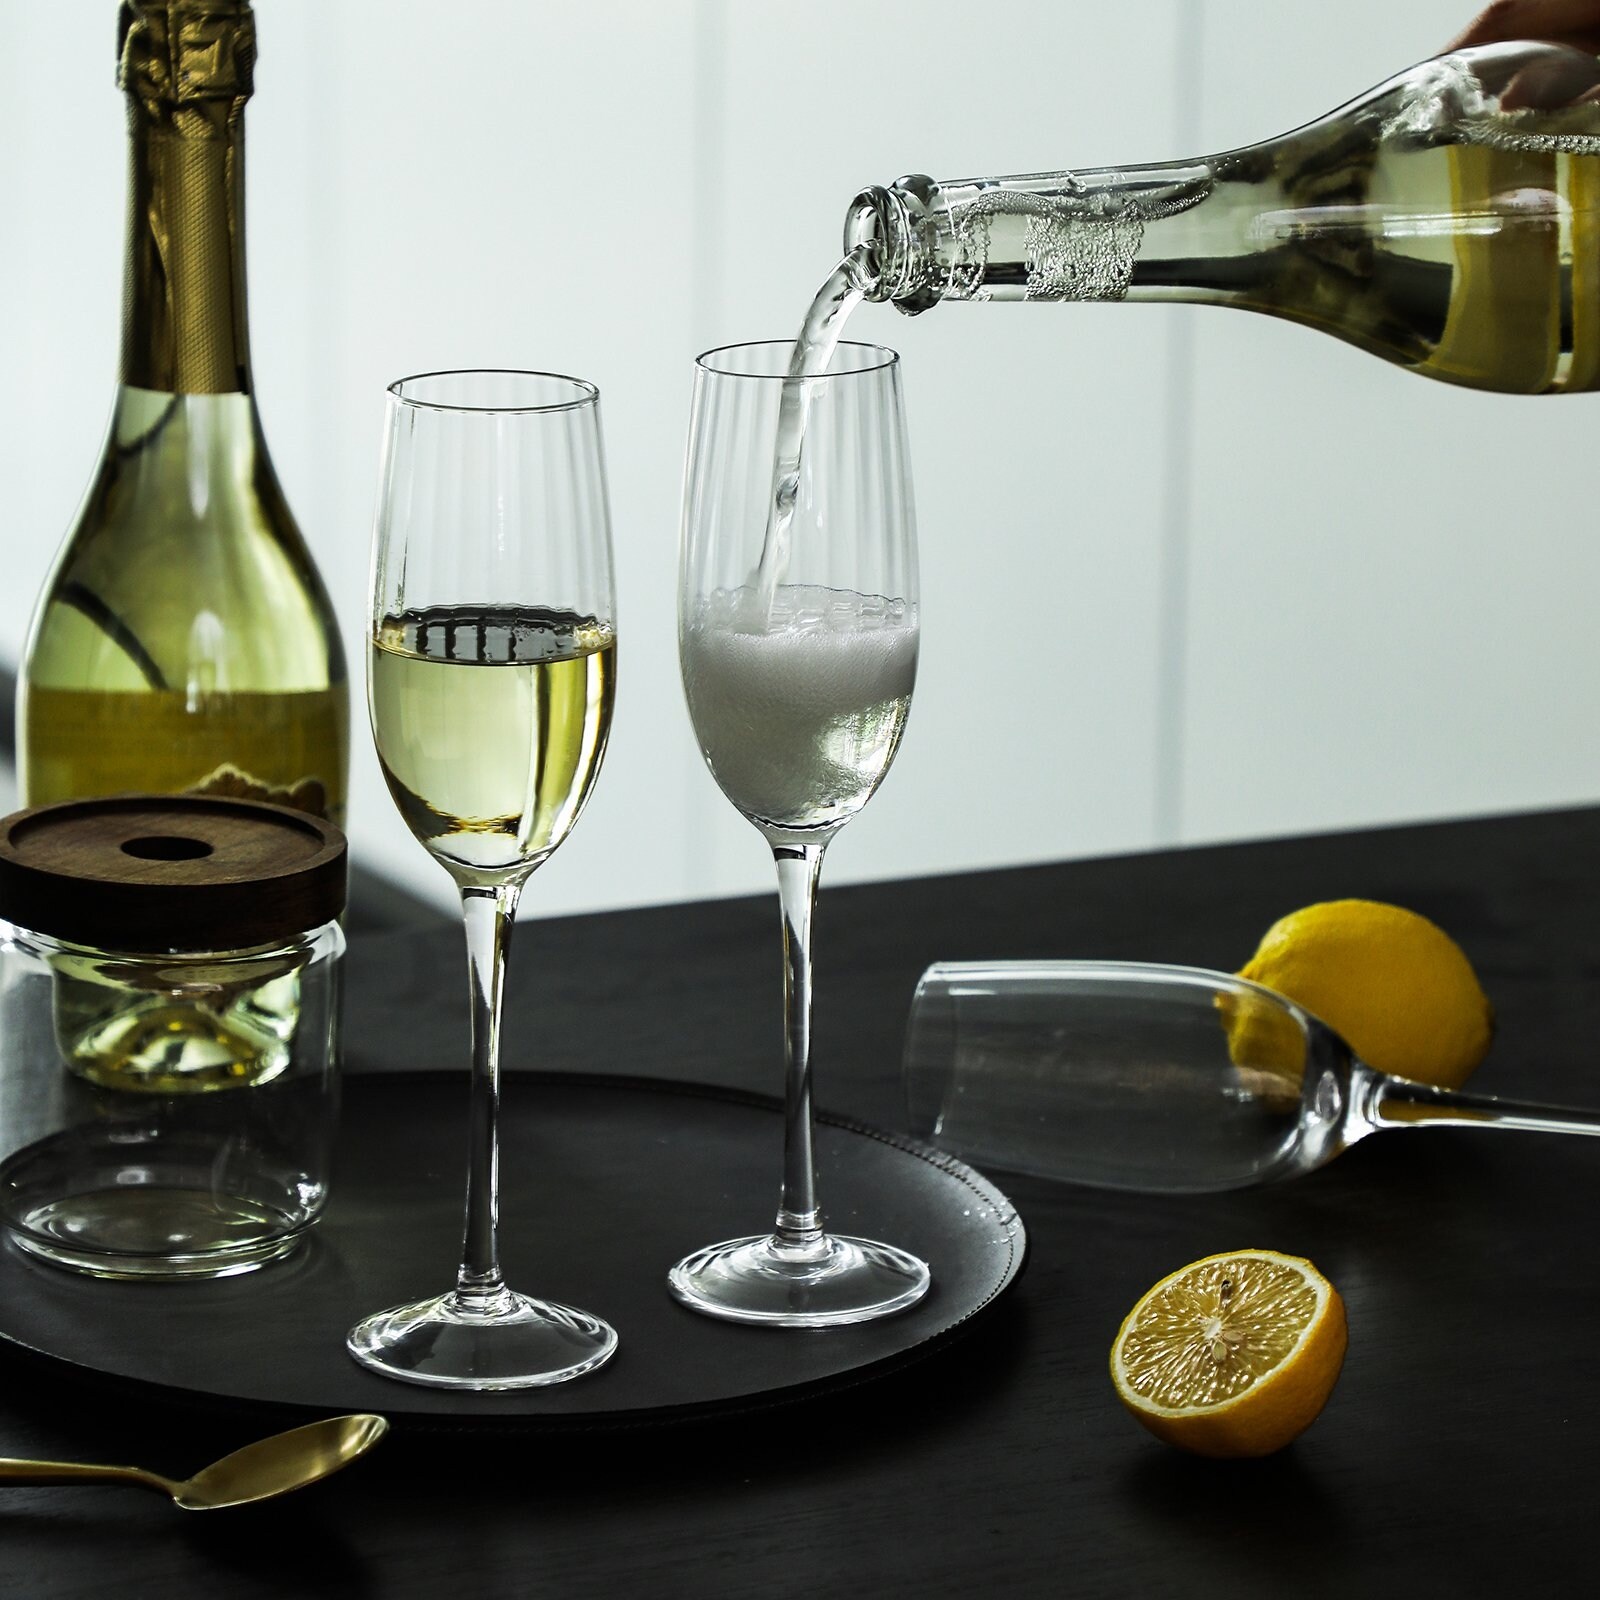 https://ak1.ostkcdn.com/images/products/is/images/direct/ad642af5f6de652be7ed899ad00fbda912b379e8/Ribbed-Optic-Champagne-Flutes-set-of-4.jpg